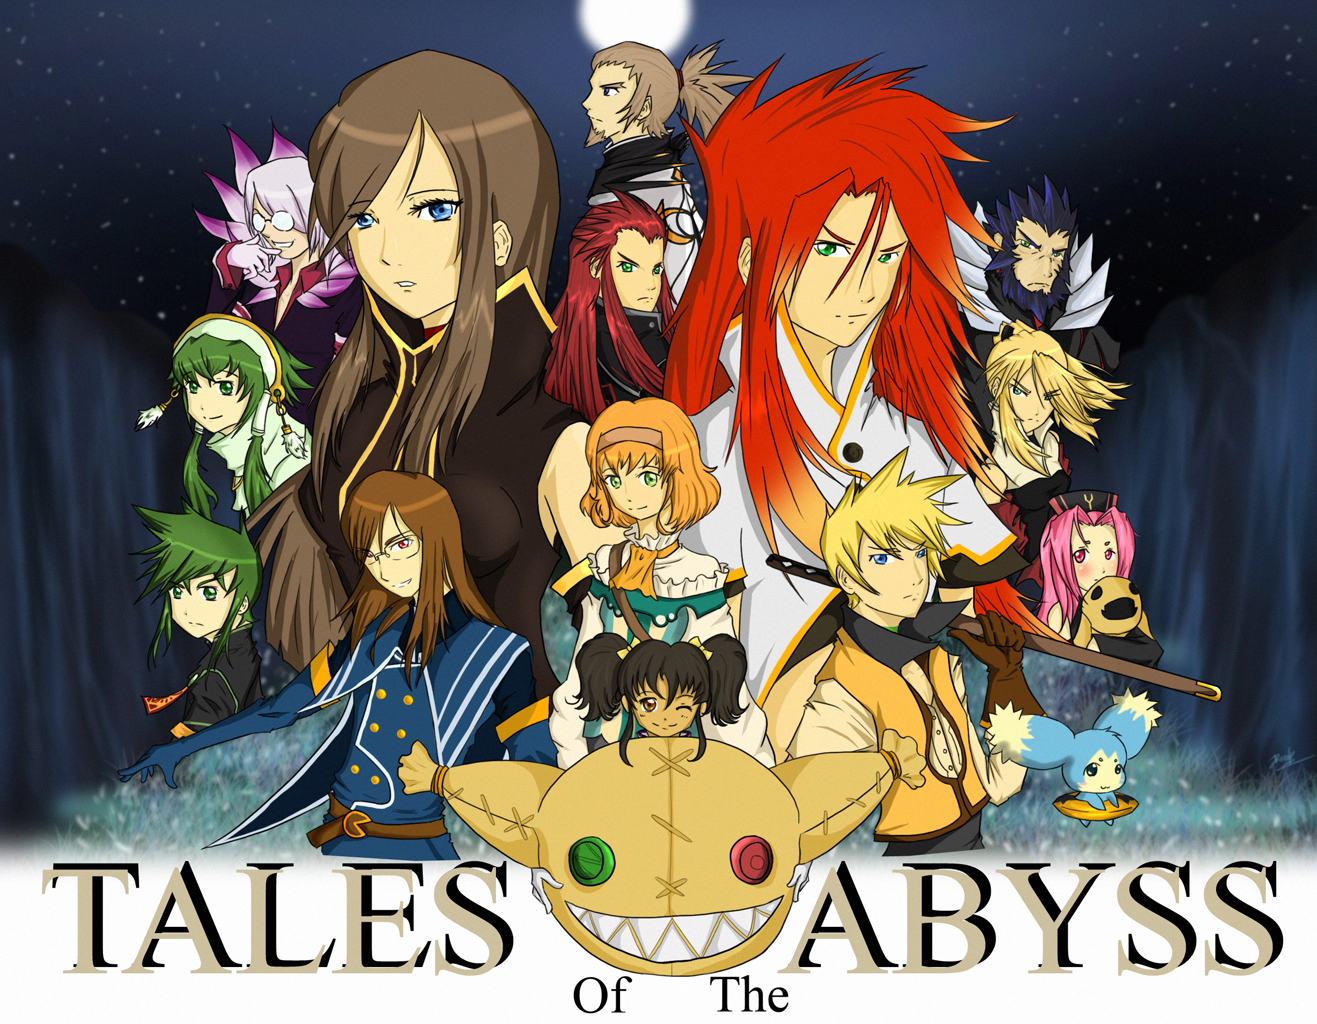 Ver Anime De Tales Of The Abyss Online